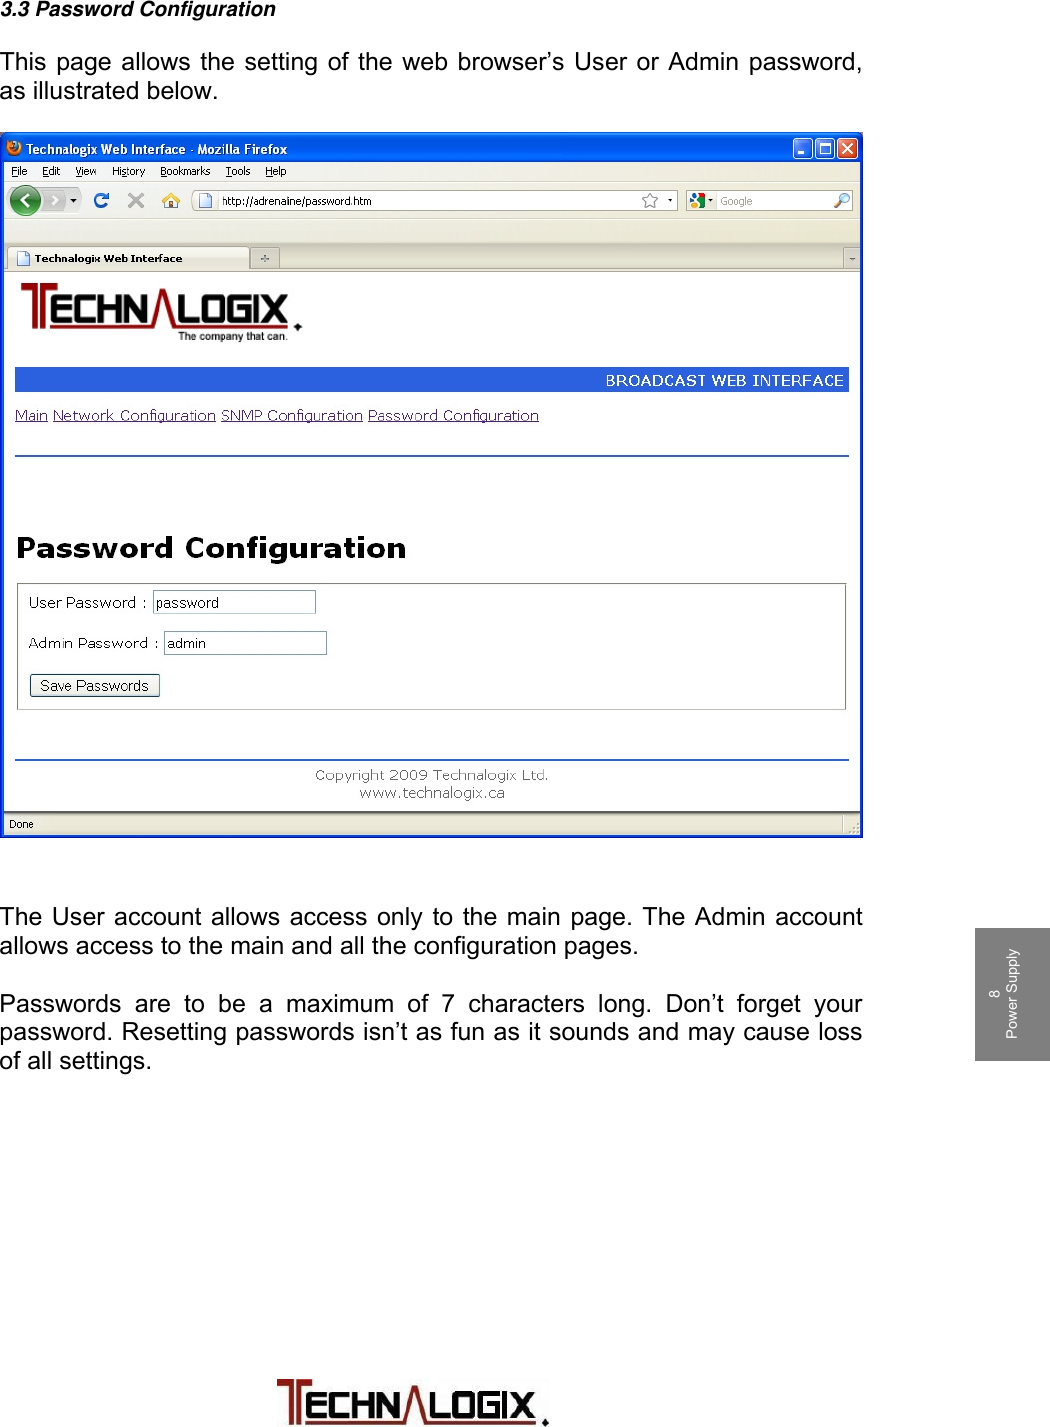         1 Safeguards  2 Terms and Warranty 3 Principle of Operation 4 Installation 5 Operation 6 Control System 7 RF Components 8 Power Supply 9 Maintenance 10 Troubleshooting 3.3 Password Configuration  This page allows the setting of the web browser’s User or Admin password, as illustrated below.                             The User account allows access only to the main page. The Admin account allows access to the main and all the configuration pages.  Passwords are to be a maximum of 7 characters long. Don’t forget your password. Resetting passwords isn’t as fun as it sounds and may cause loss of all settings. 